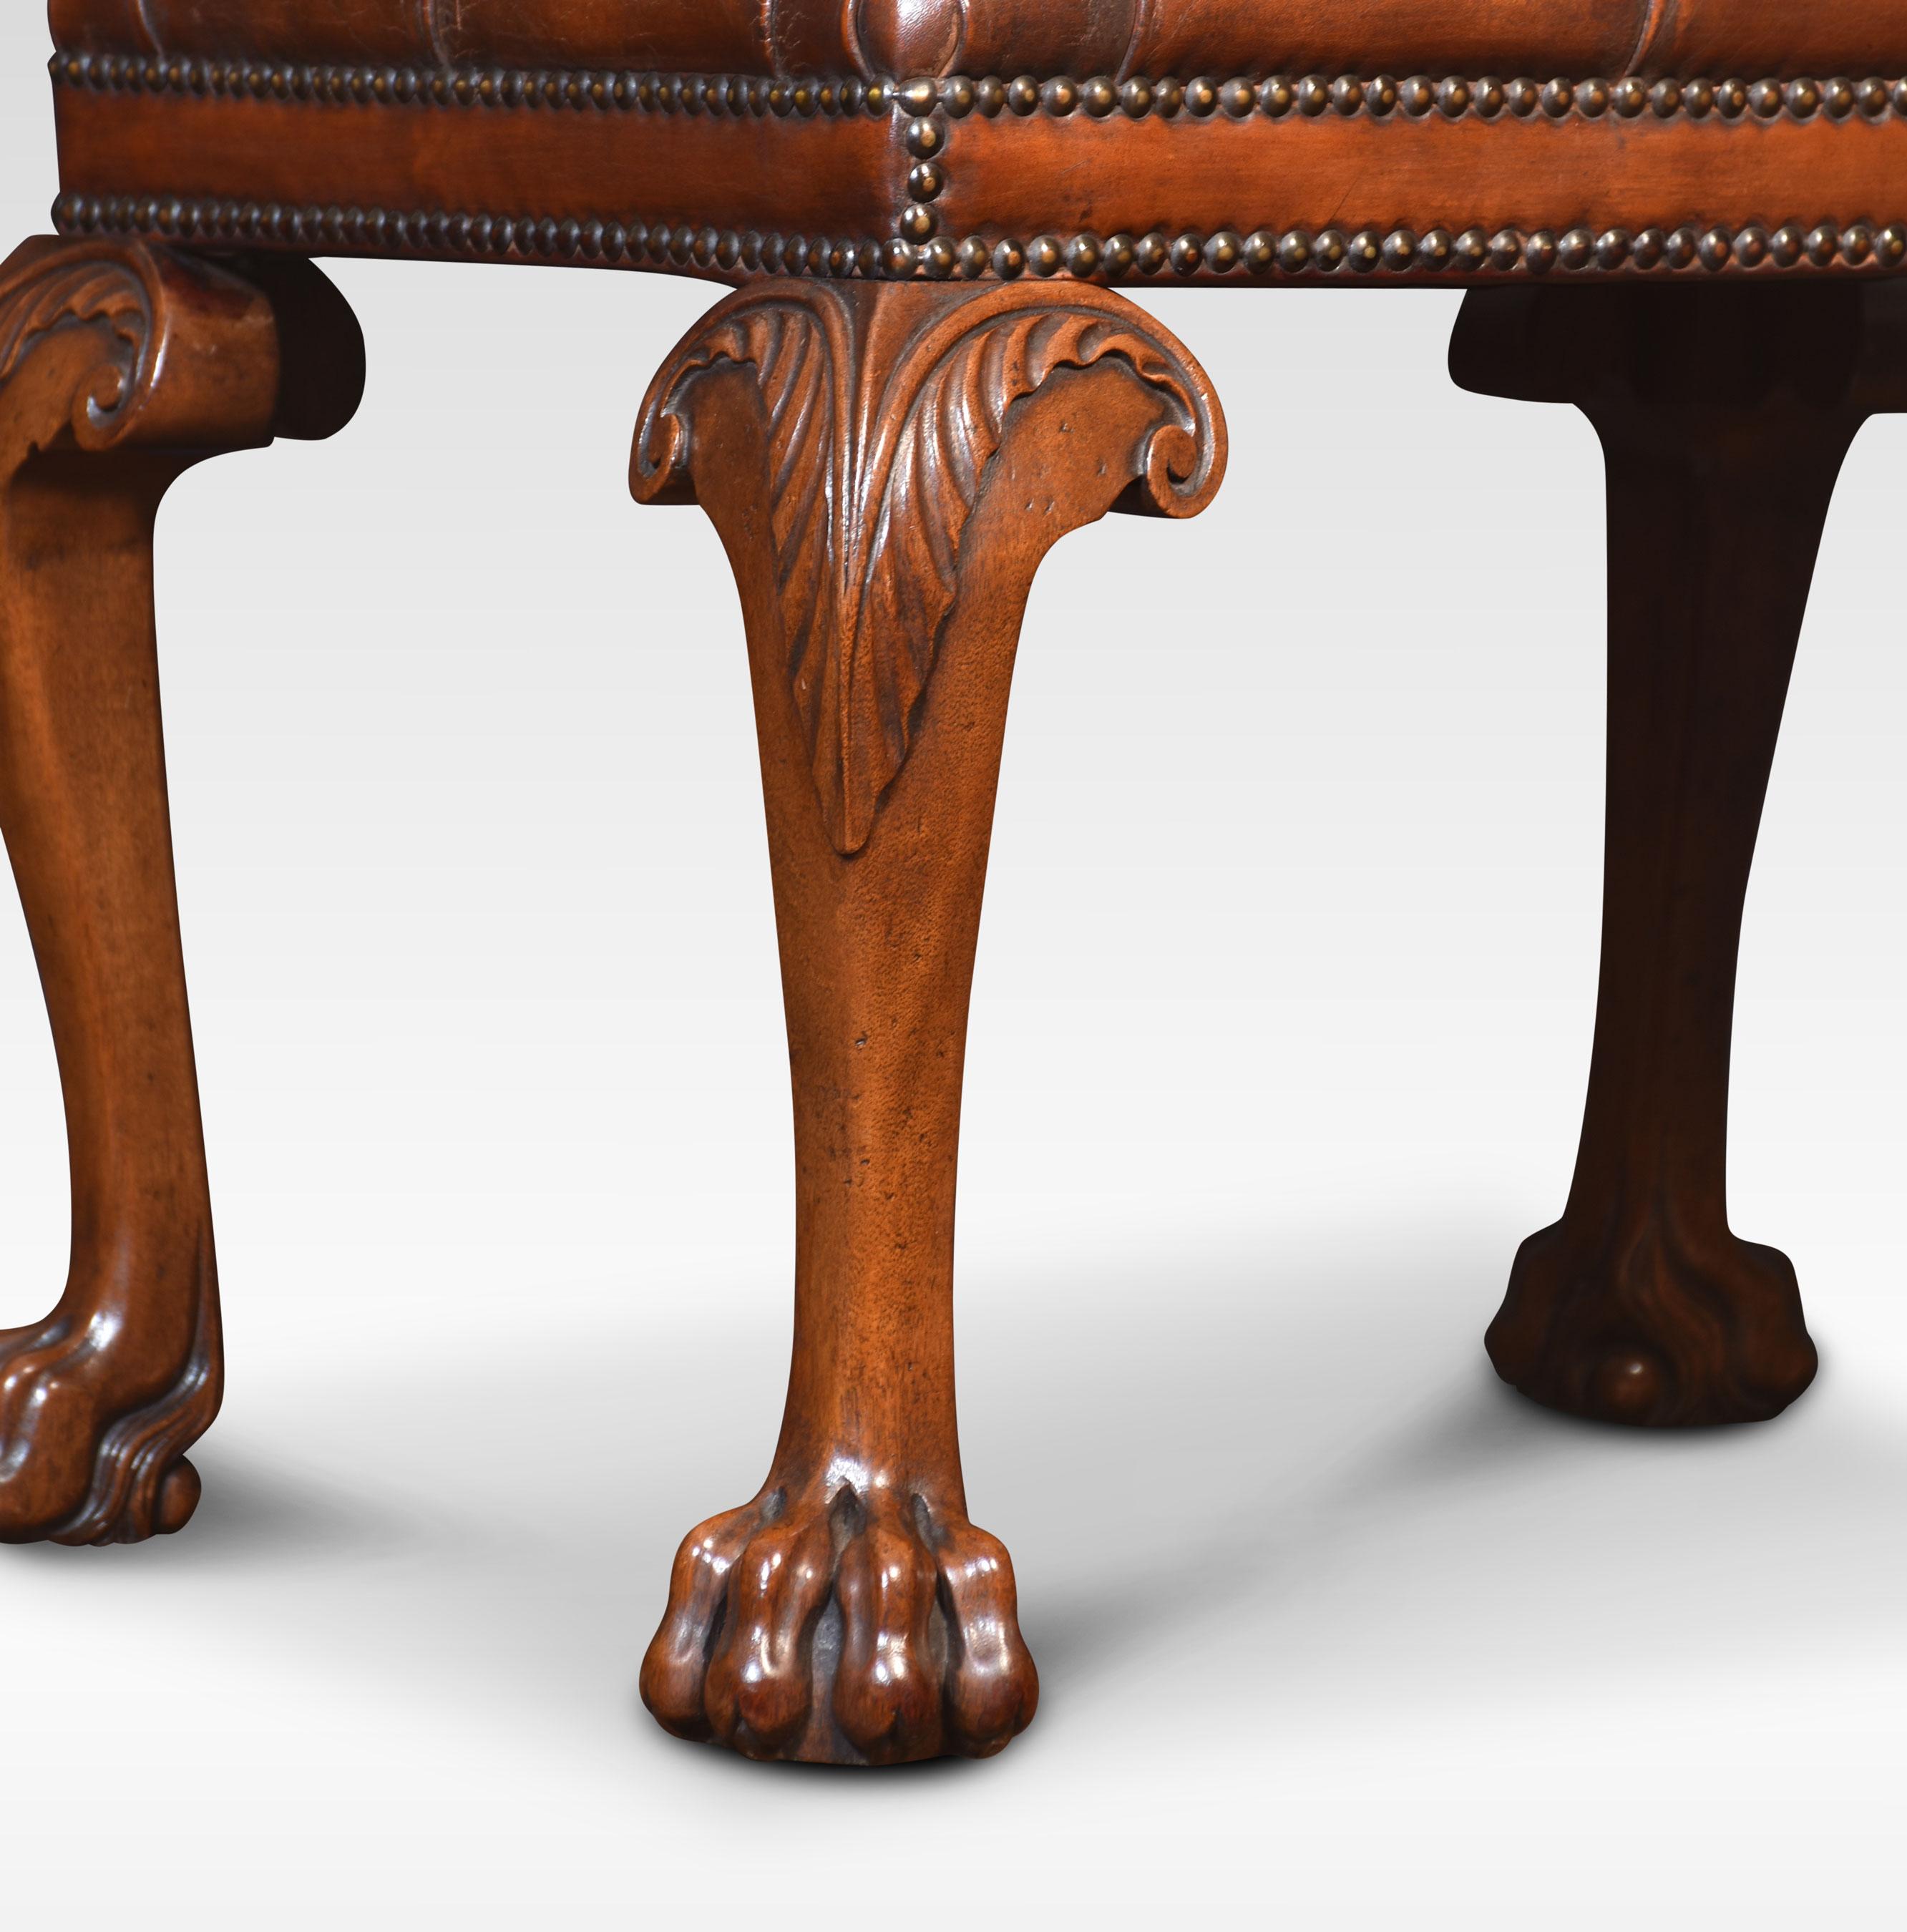 Carved stool, the rectangular upholstered brown leather deep buttoned seats raised up on four carved cabriole legs terminating in paw feet. The leather has been replaced and hand-dyed.
Dimensions
Height 18 Inches
Width 24.5 Inches
Depth 18.5